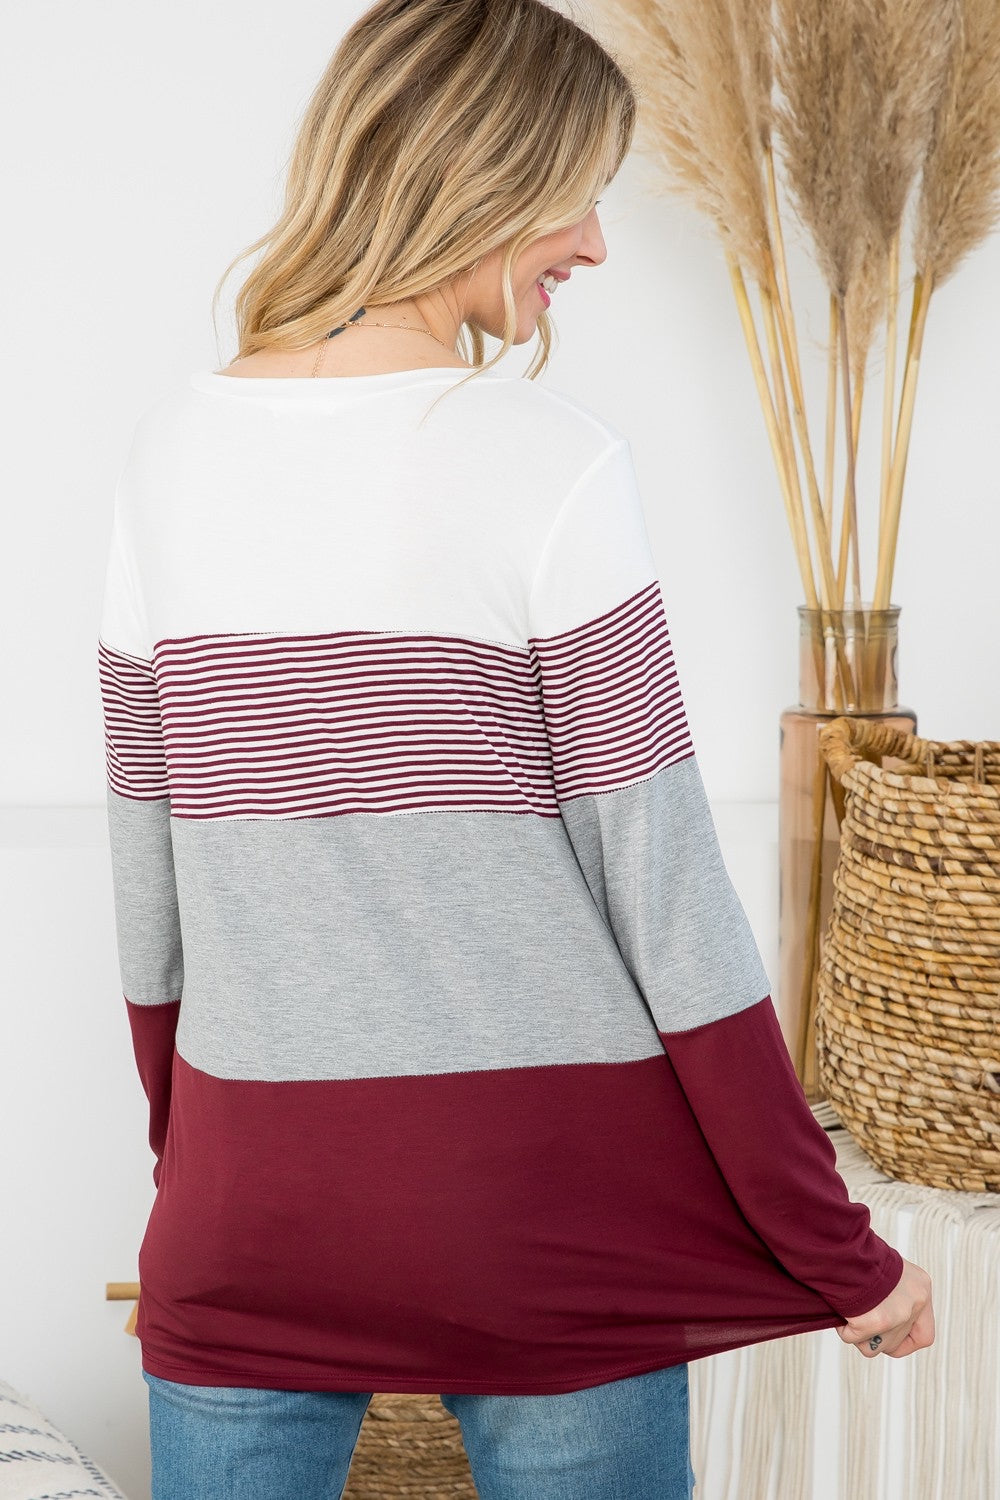 LONG SLEEVE SOLID STRIPE COLORBLOCK (multiple colors available)